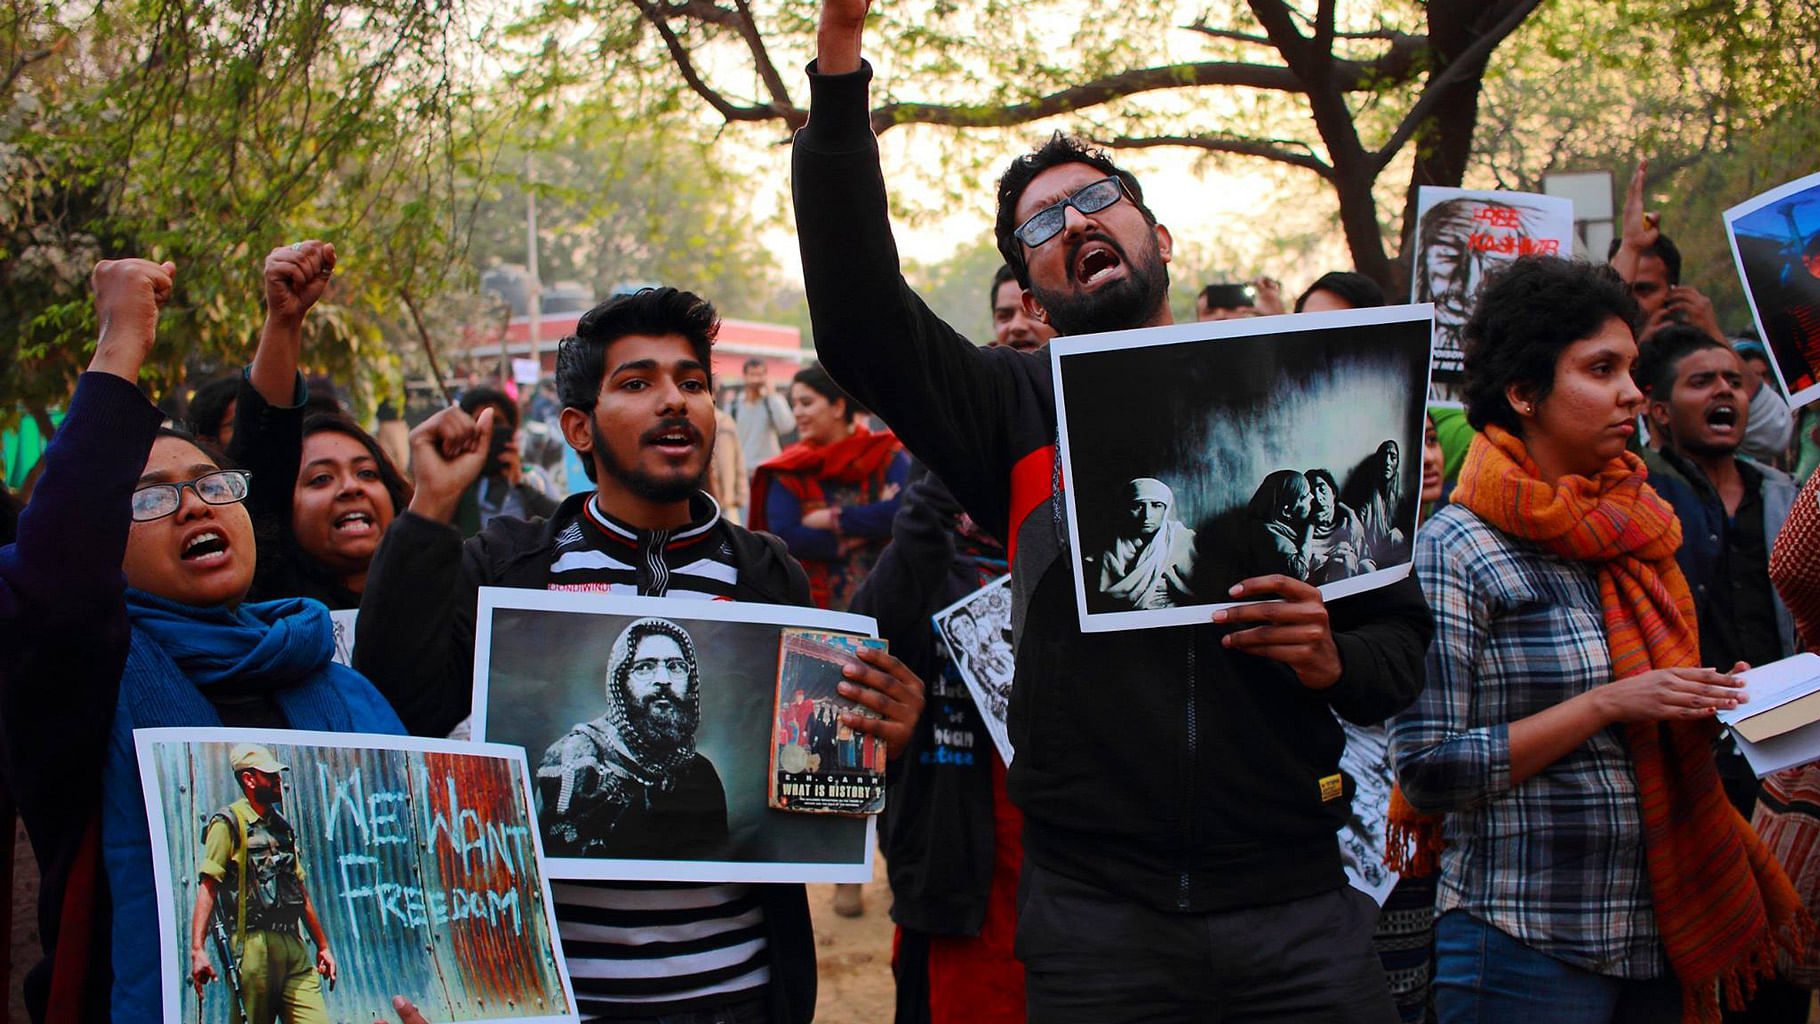 JNU students at the controversial event. (Photo Courtesy: <a href="https://www.facebook.com/reyaz.hashiya?fref=photo">Reyazul Haque’s Facebook Page</a>)